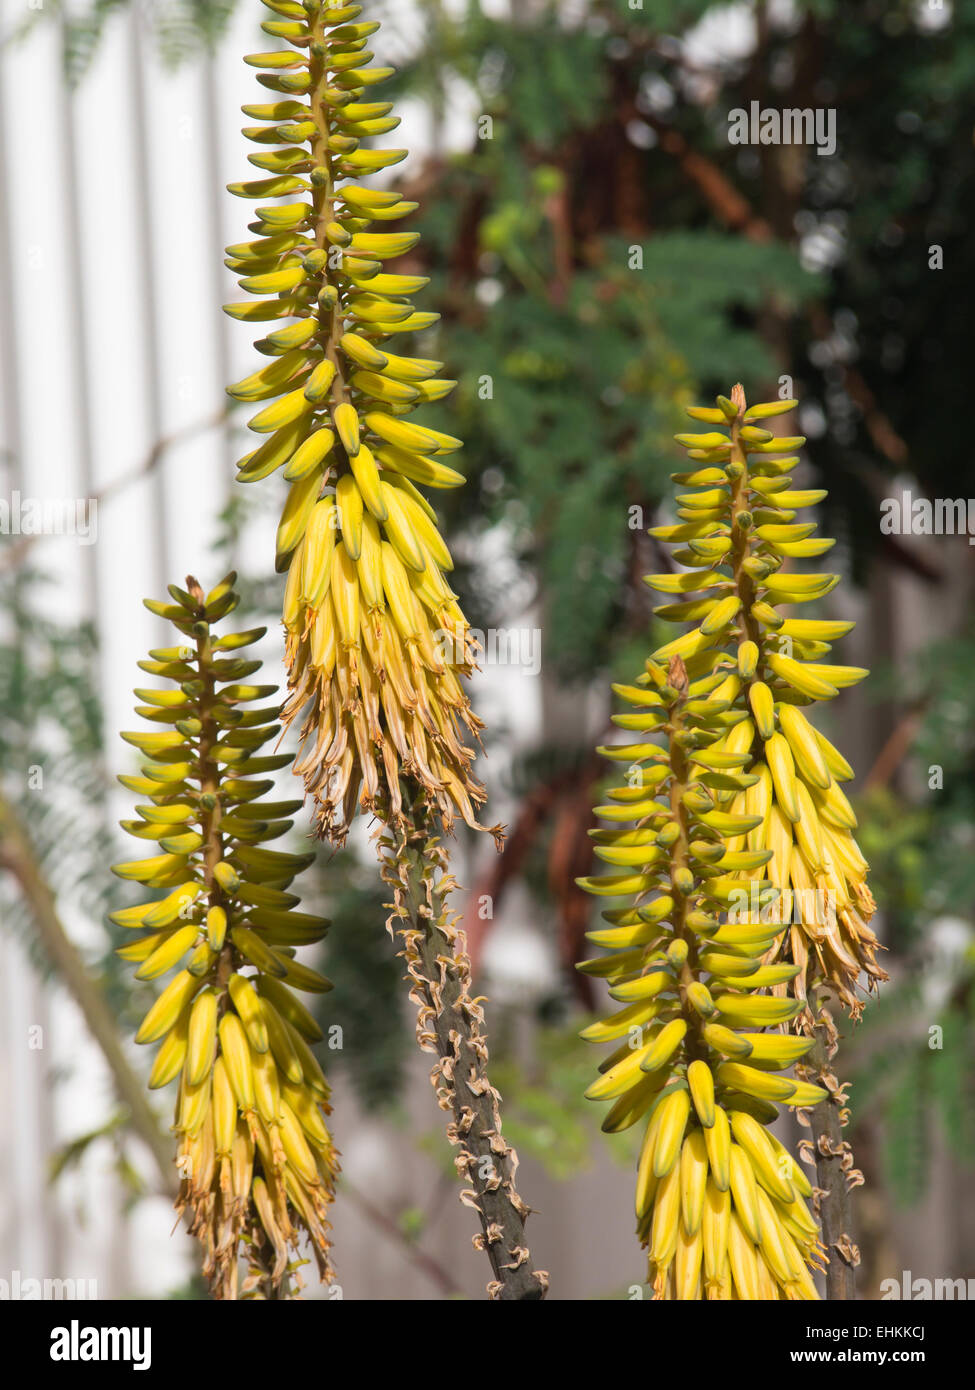 Aloe vera yellow flowers from the succulent plant cultivated in Fuerteventura, Canary islands Spain Stock Photo